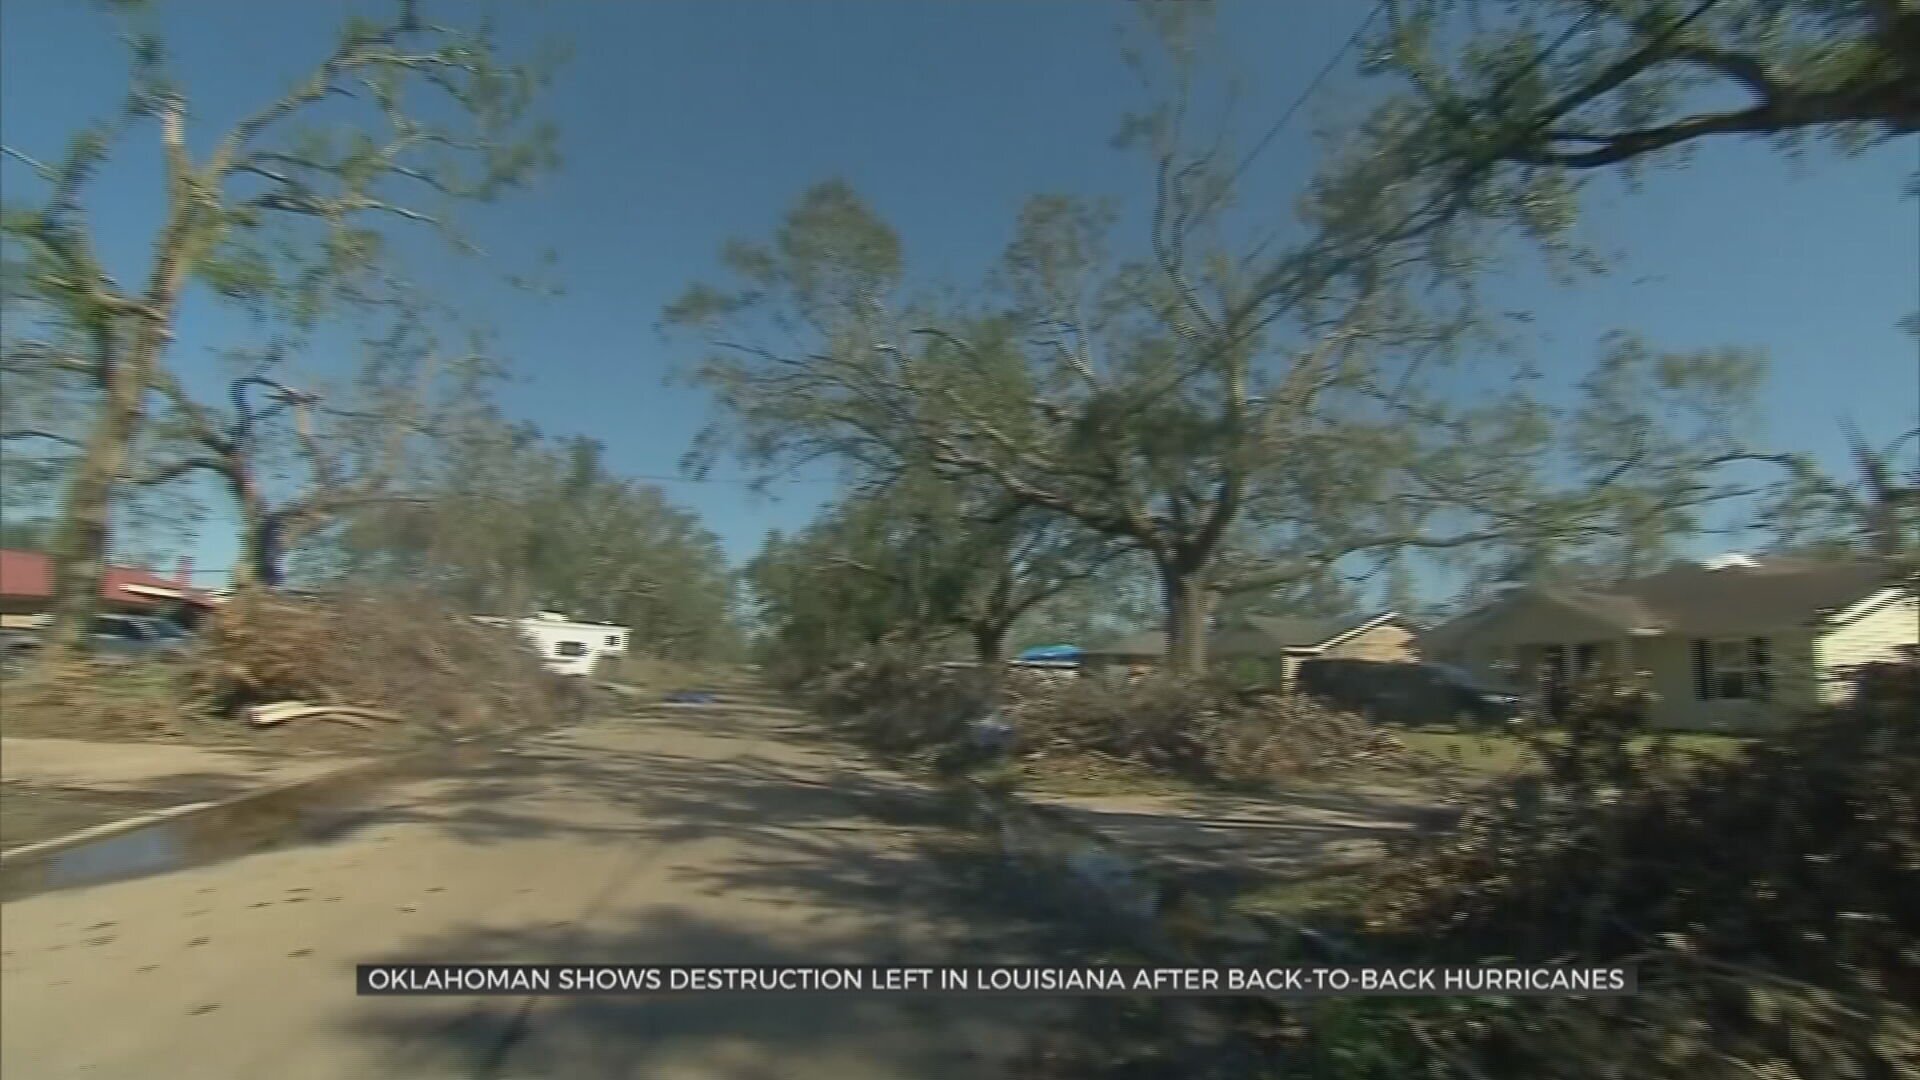 Oklahoman Shows Destruction Left In Louisiana After Back-To-Back Hurricanes 